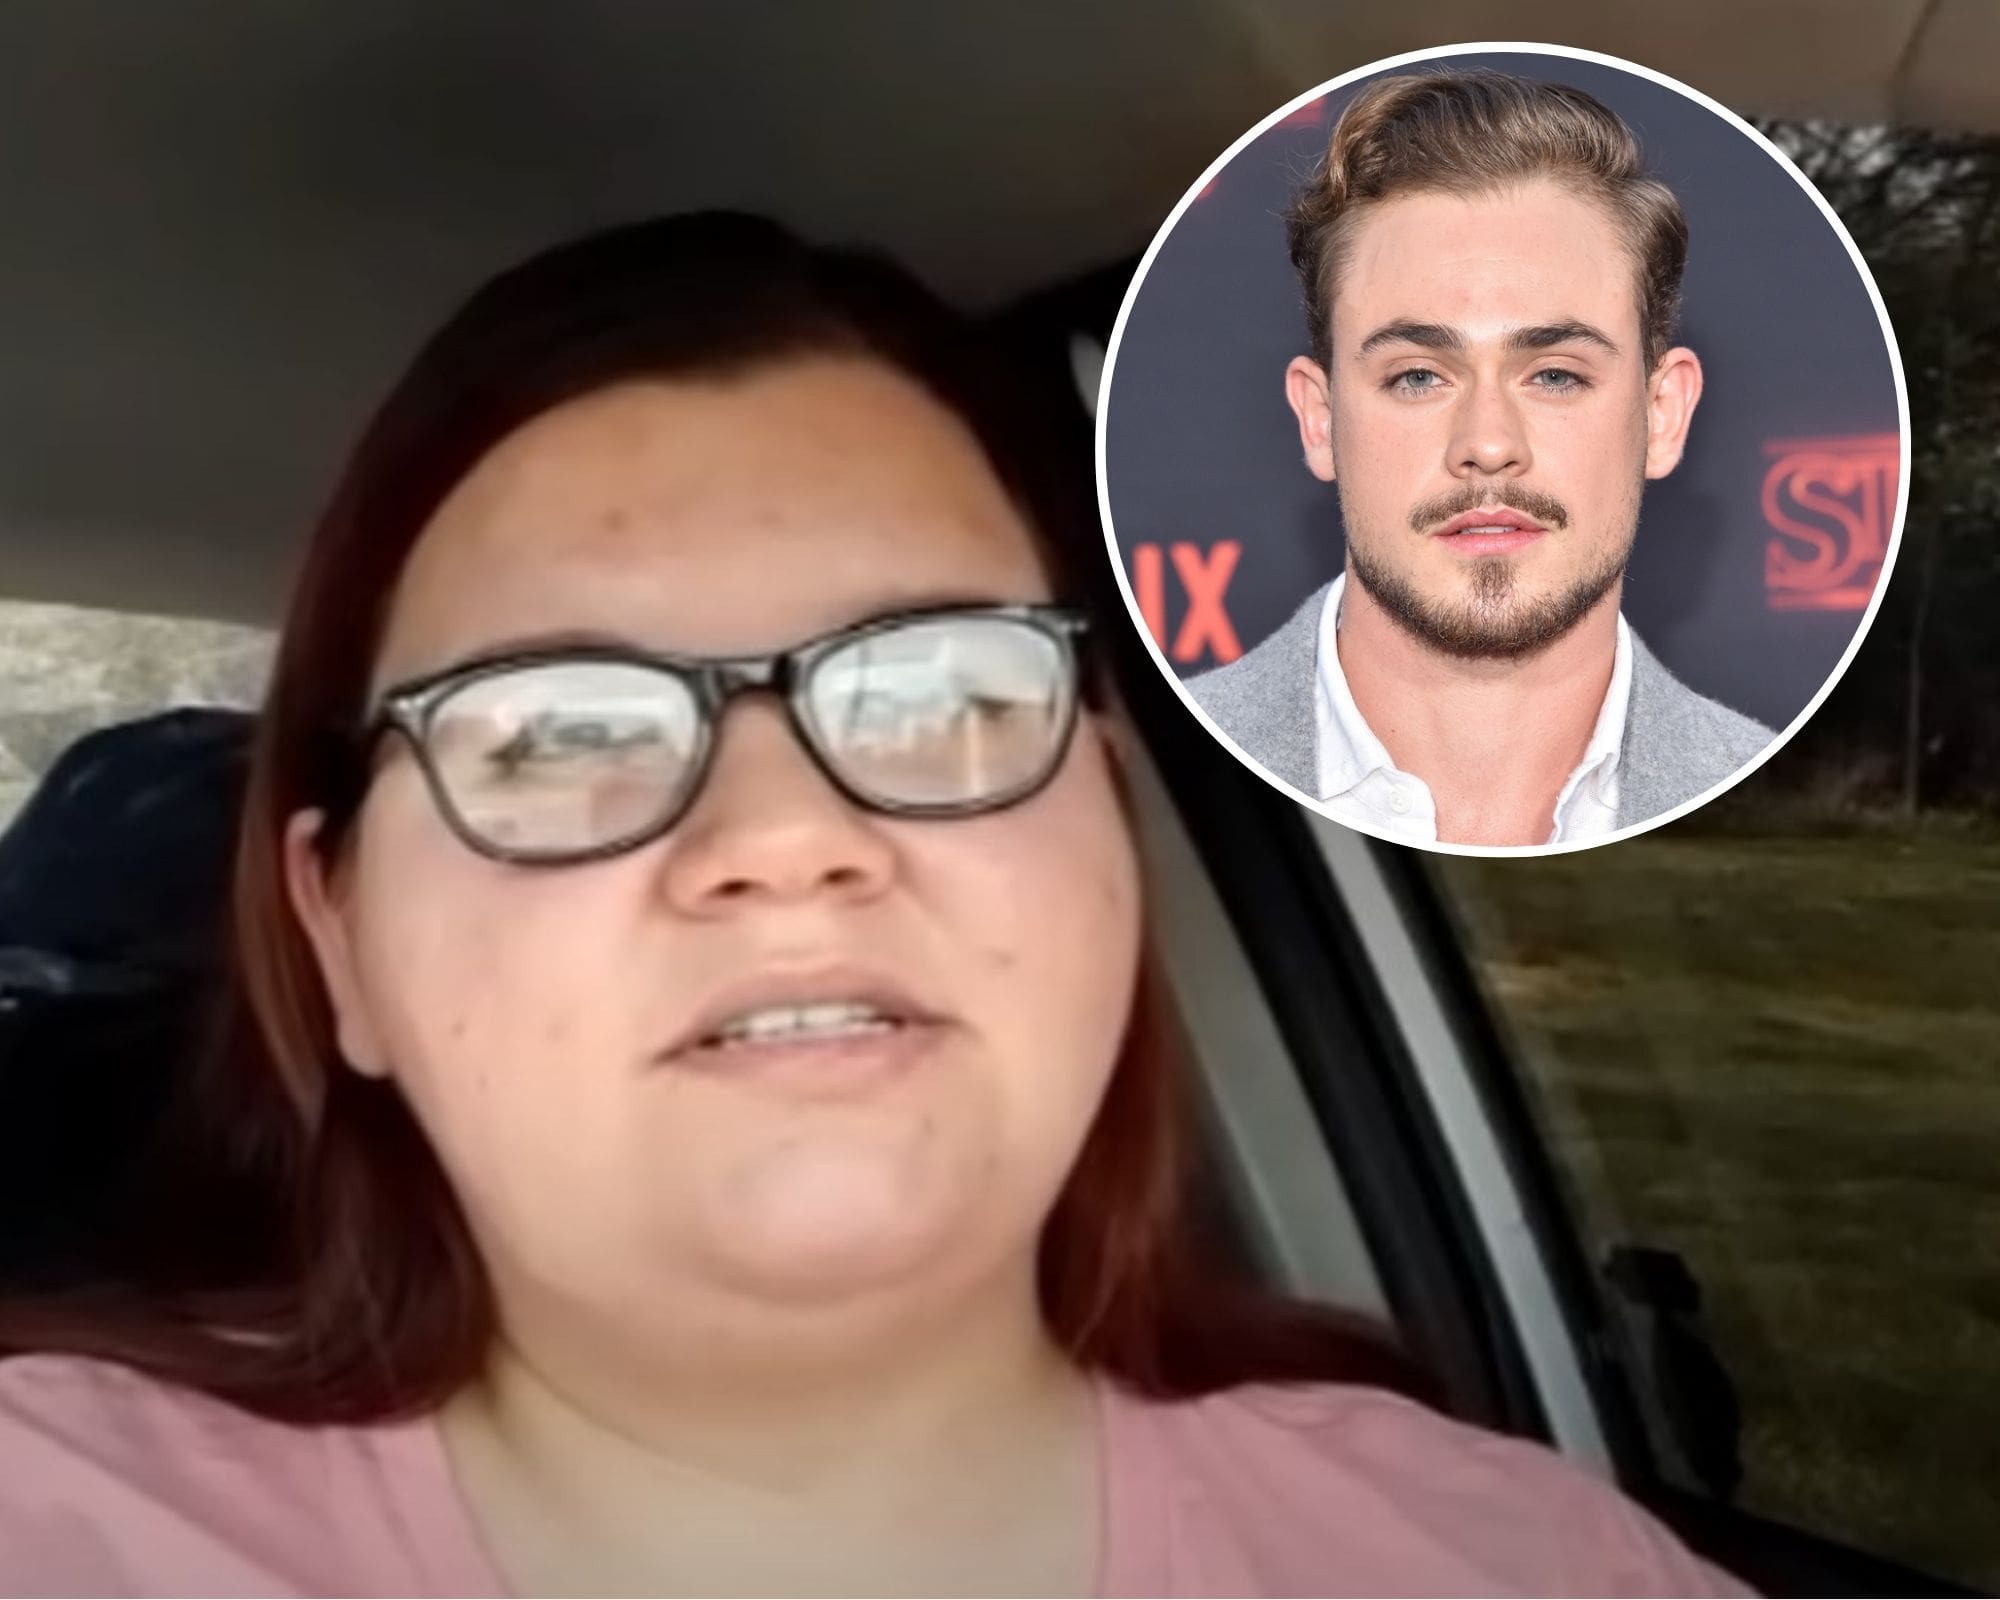 Mom Thought ‘Stranger Things’ Star Was Her Boyfriend, Devastated To Learn She Was Scammed After She Divorced Her Husband